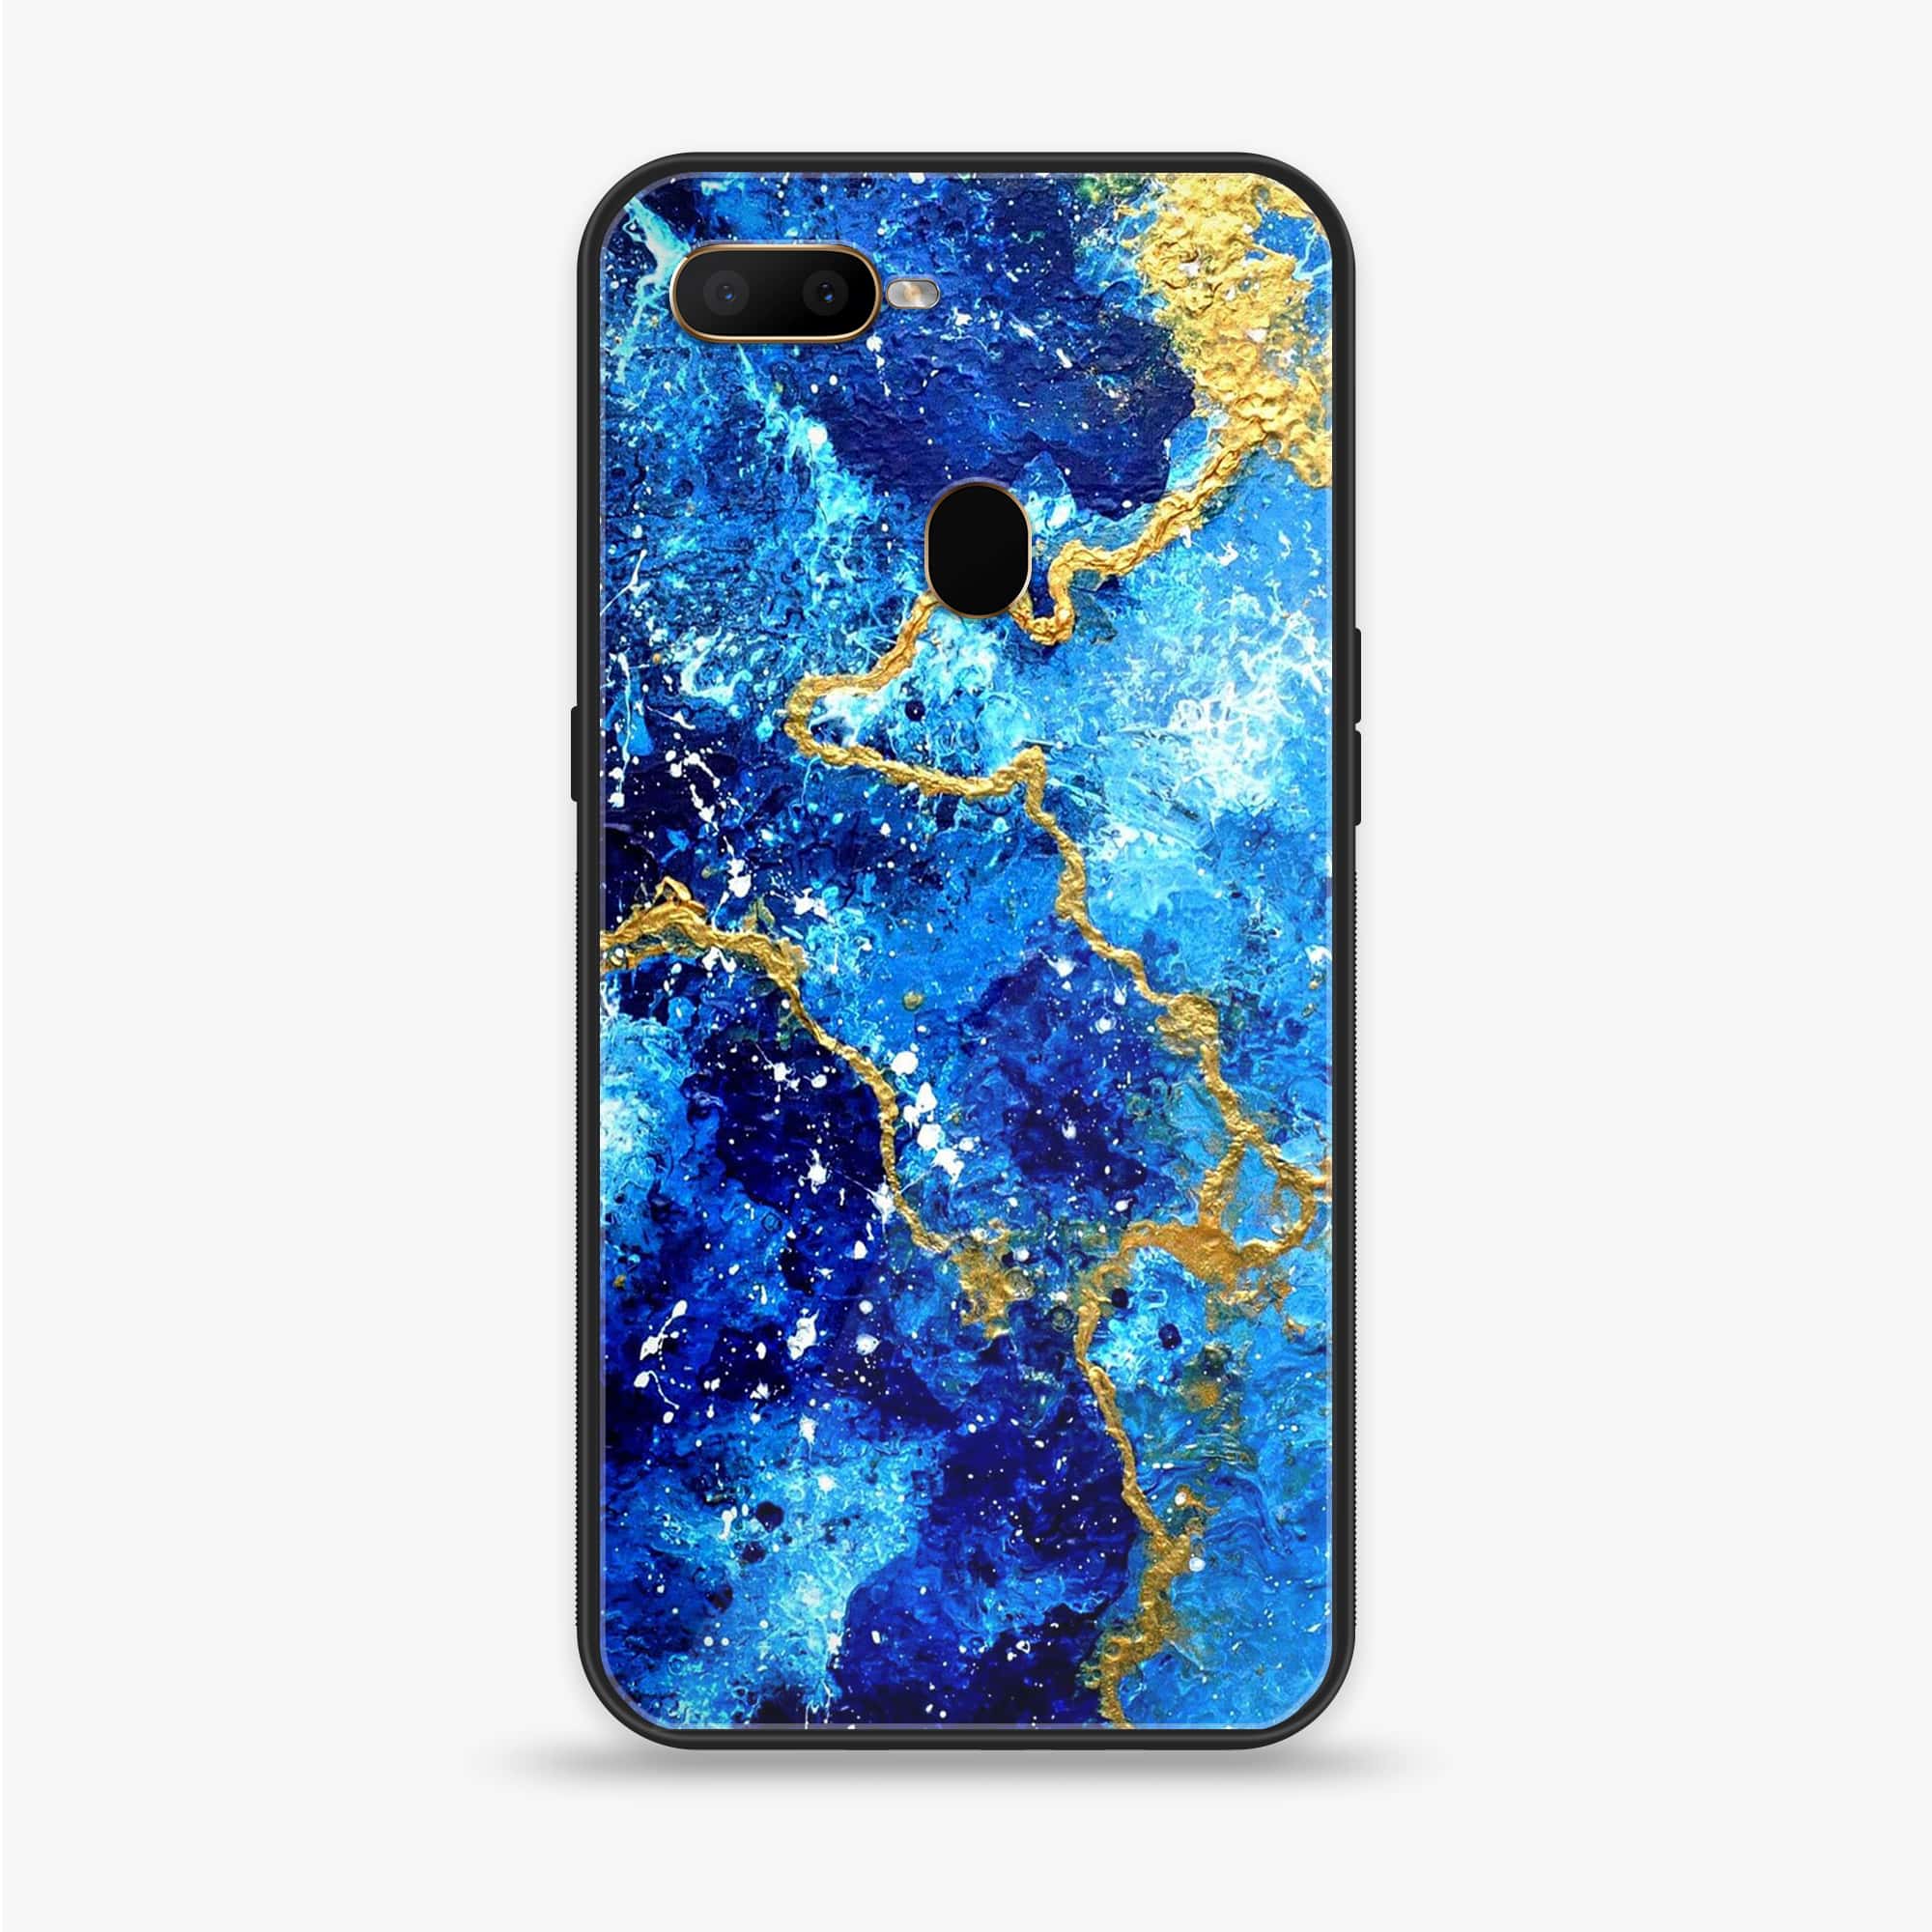 Oppo A7 - Blue Marble Series V 2.0 - Premium Printed Glass soft Bumper shock Proof Case